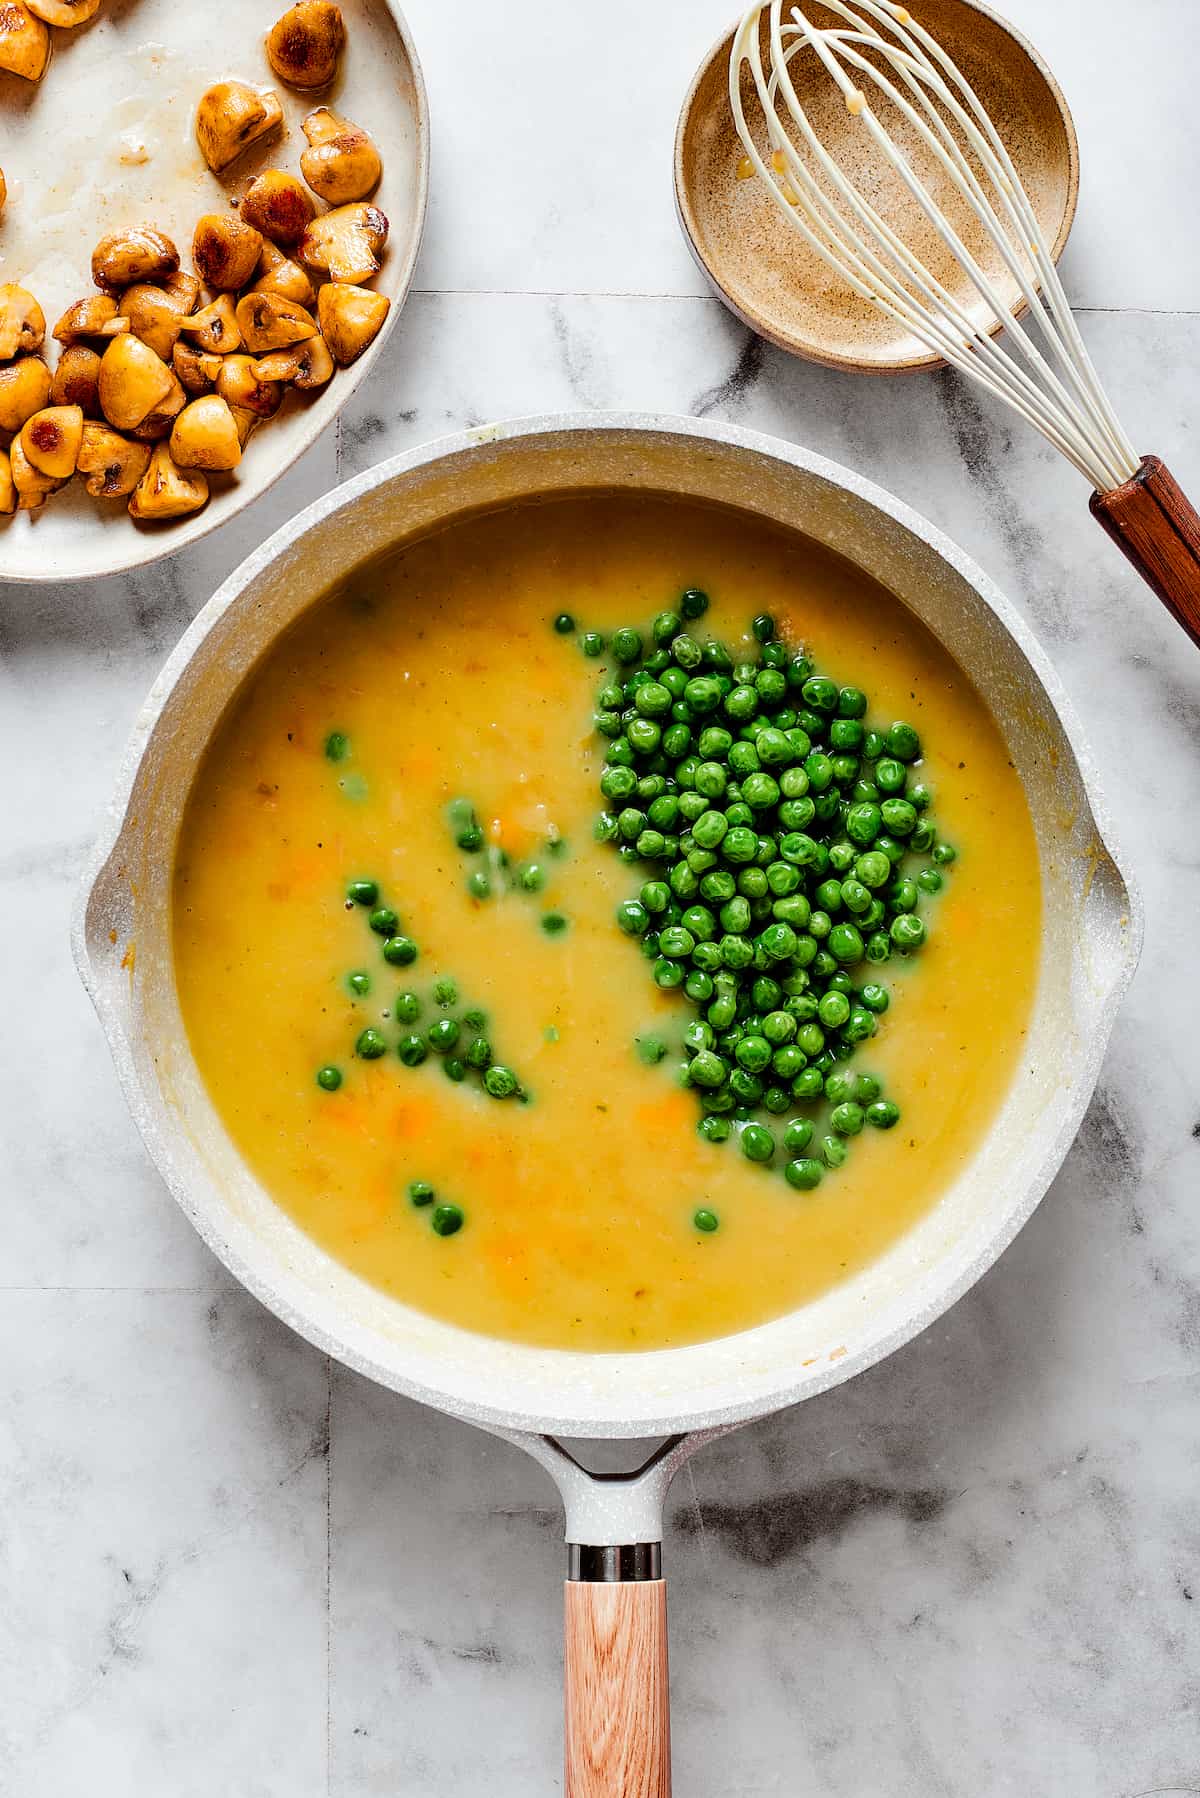 Chicken broth and peas are added to a pot,